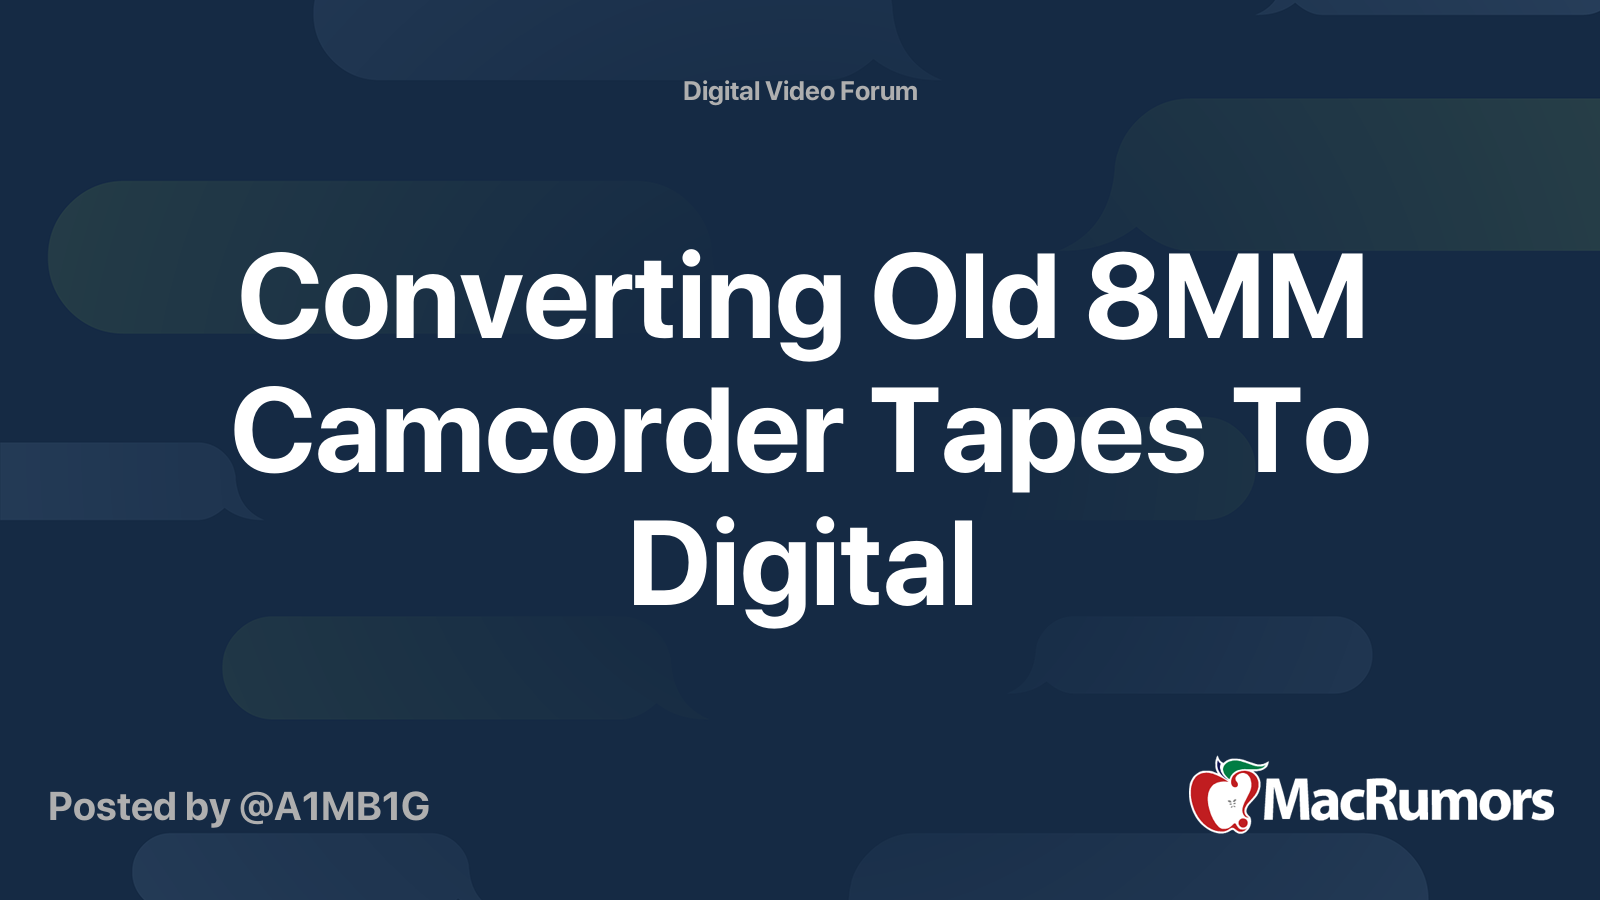 Converting Old 8MM Camcorder Tapes To Digital